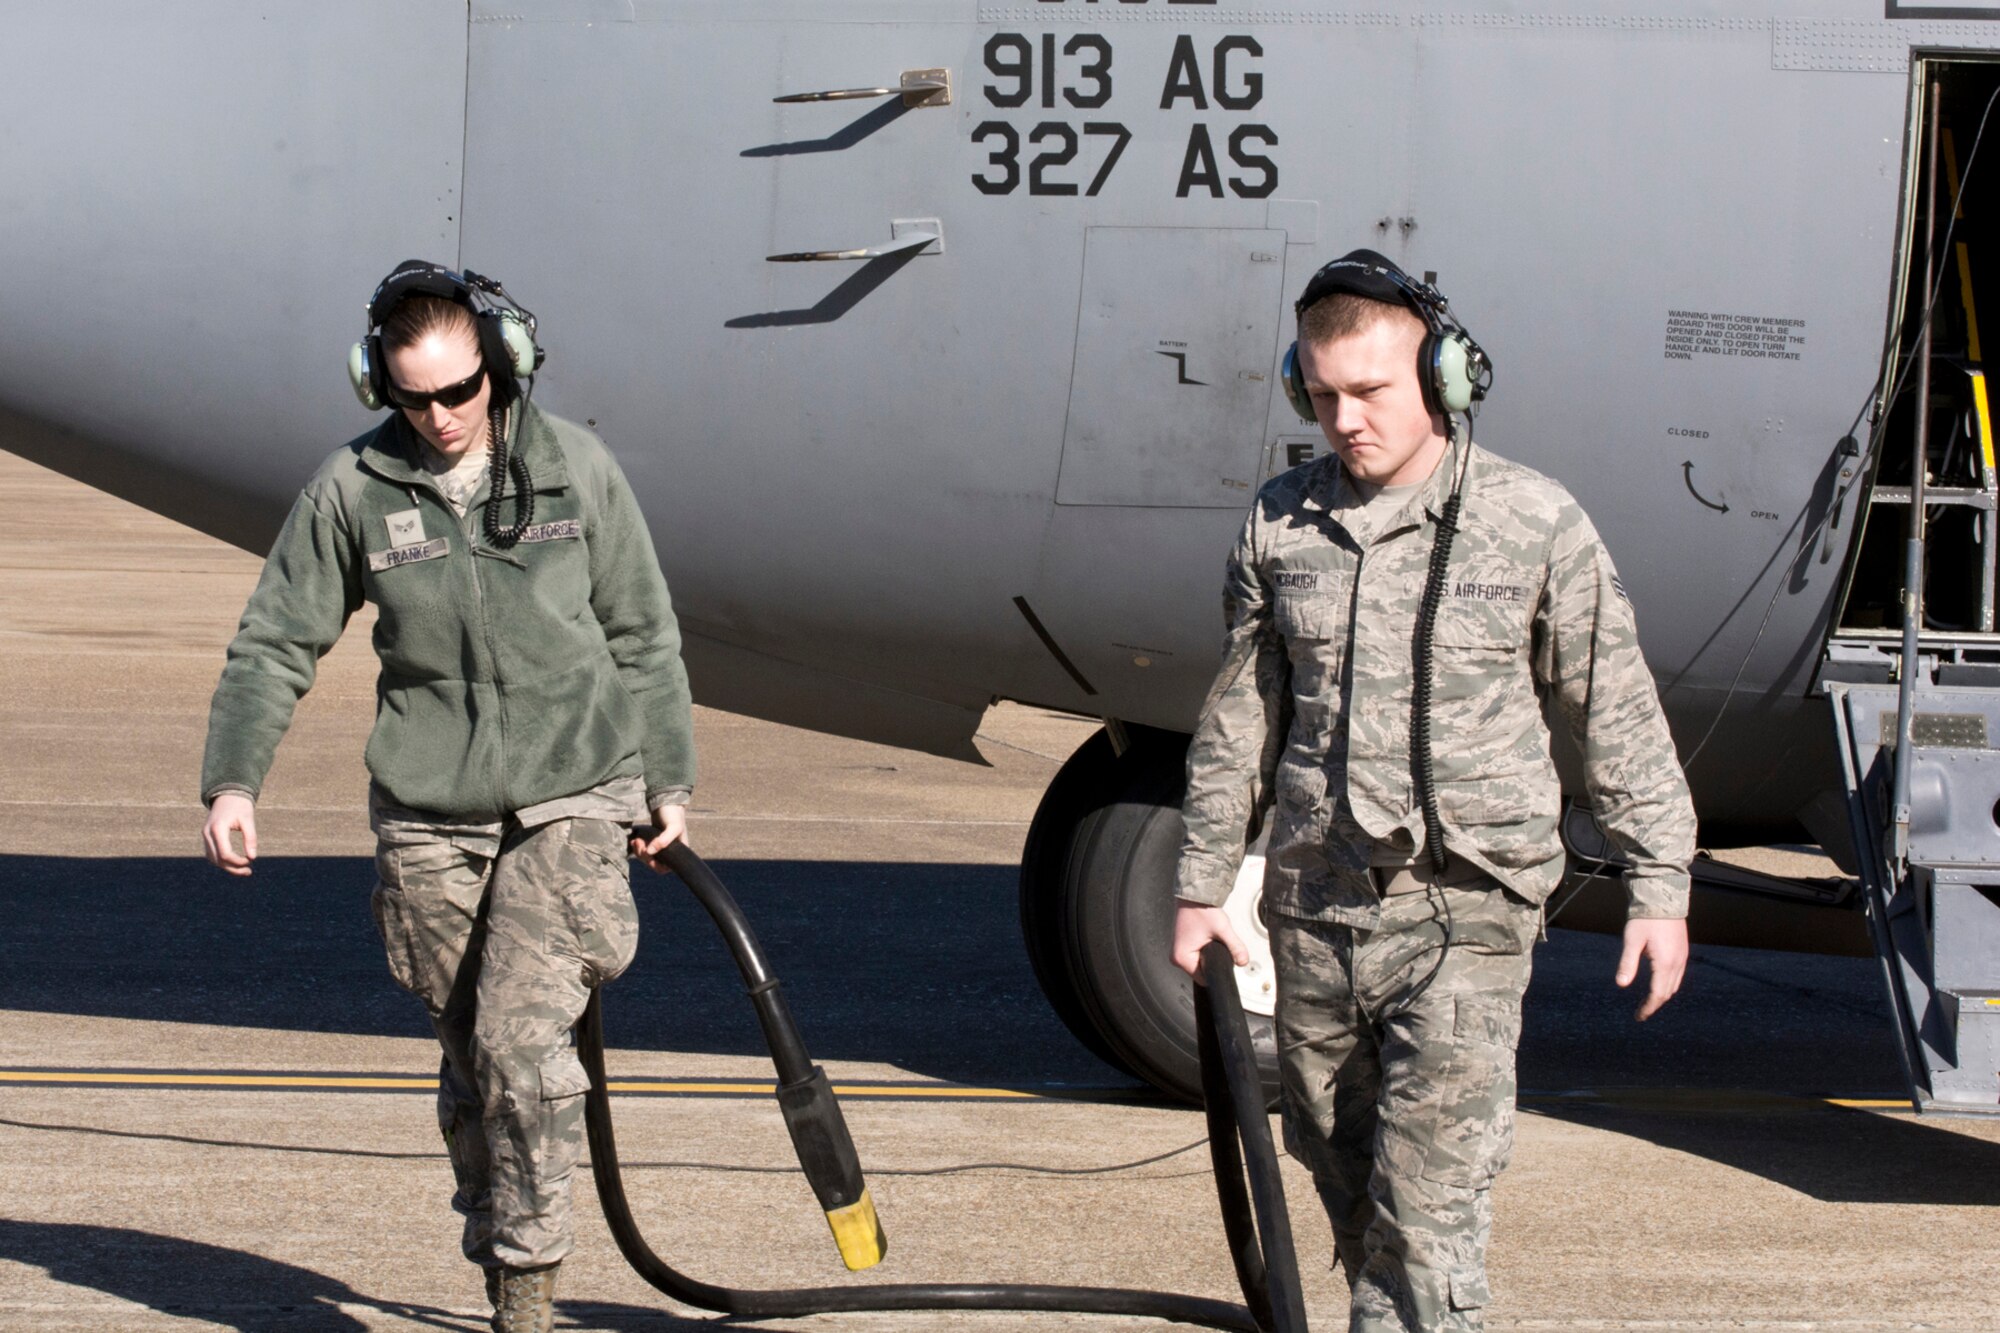 U.S. Air Force Reserve Senior Airmen Jennifer Franke and Dawton McGaugh, remove a power cart connection from a C-130H Hercules before it flies its final training mission at Little Rock Air Force Base, Ark, Jan. 28, 2016. Both Airmen are crew chiefs assigned to the 913th Maintenance Squadron, and were allowed to ride on the final training mission for the 913th Airlift Group in its transition from the C-130 “H” model to the newer “J” model. (U.S. Air Force photo by Master Sgt. Jeff Walston/Released)   